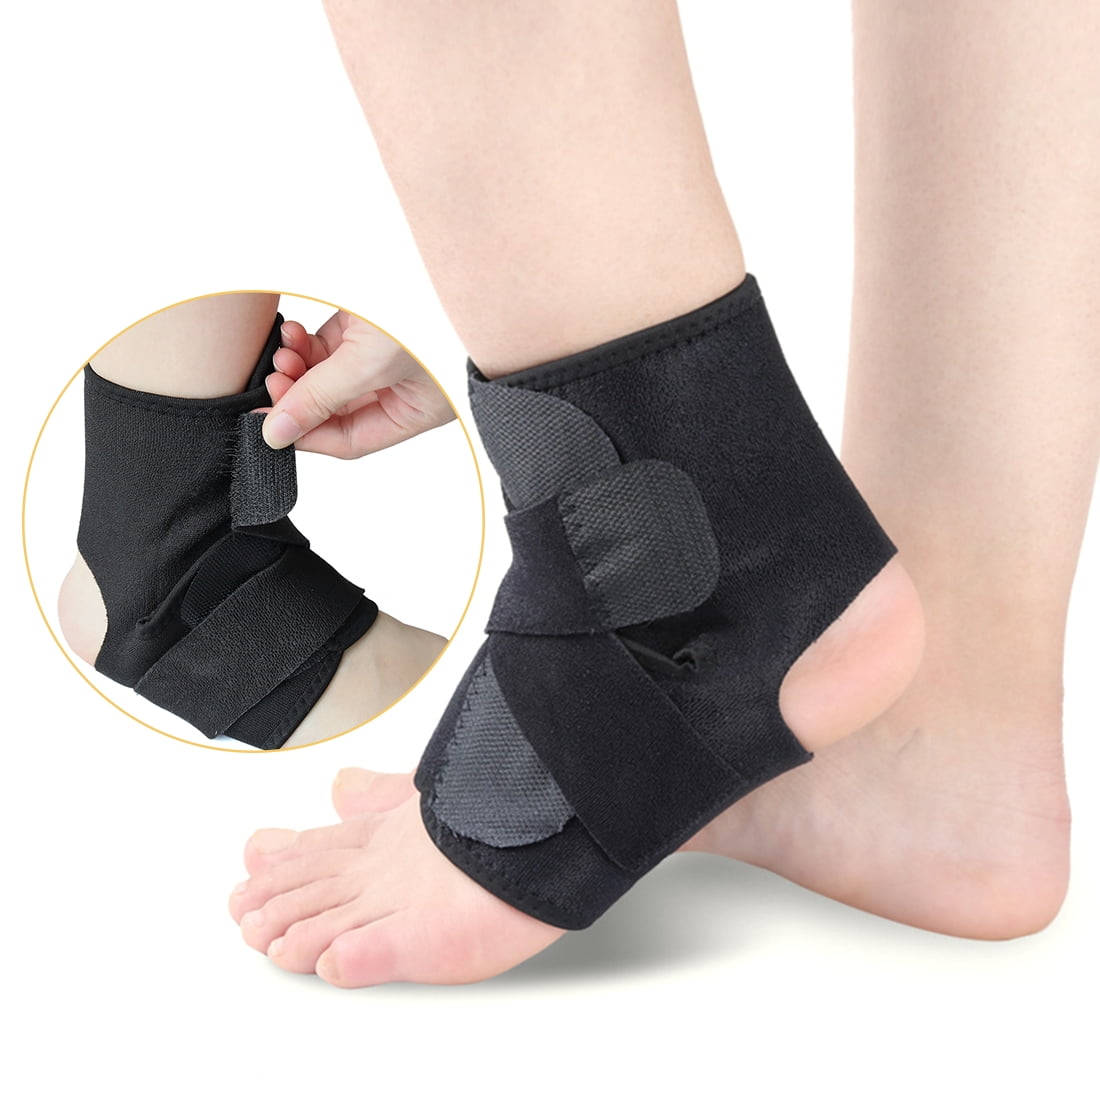 Foot Brace Ankle Support Strap Medical Compression Elastic Bandage Wrap Free P&P 